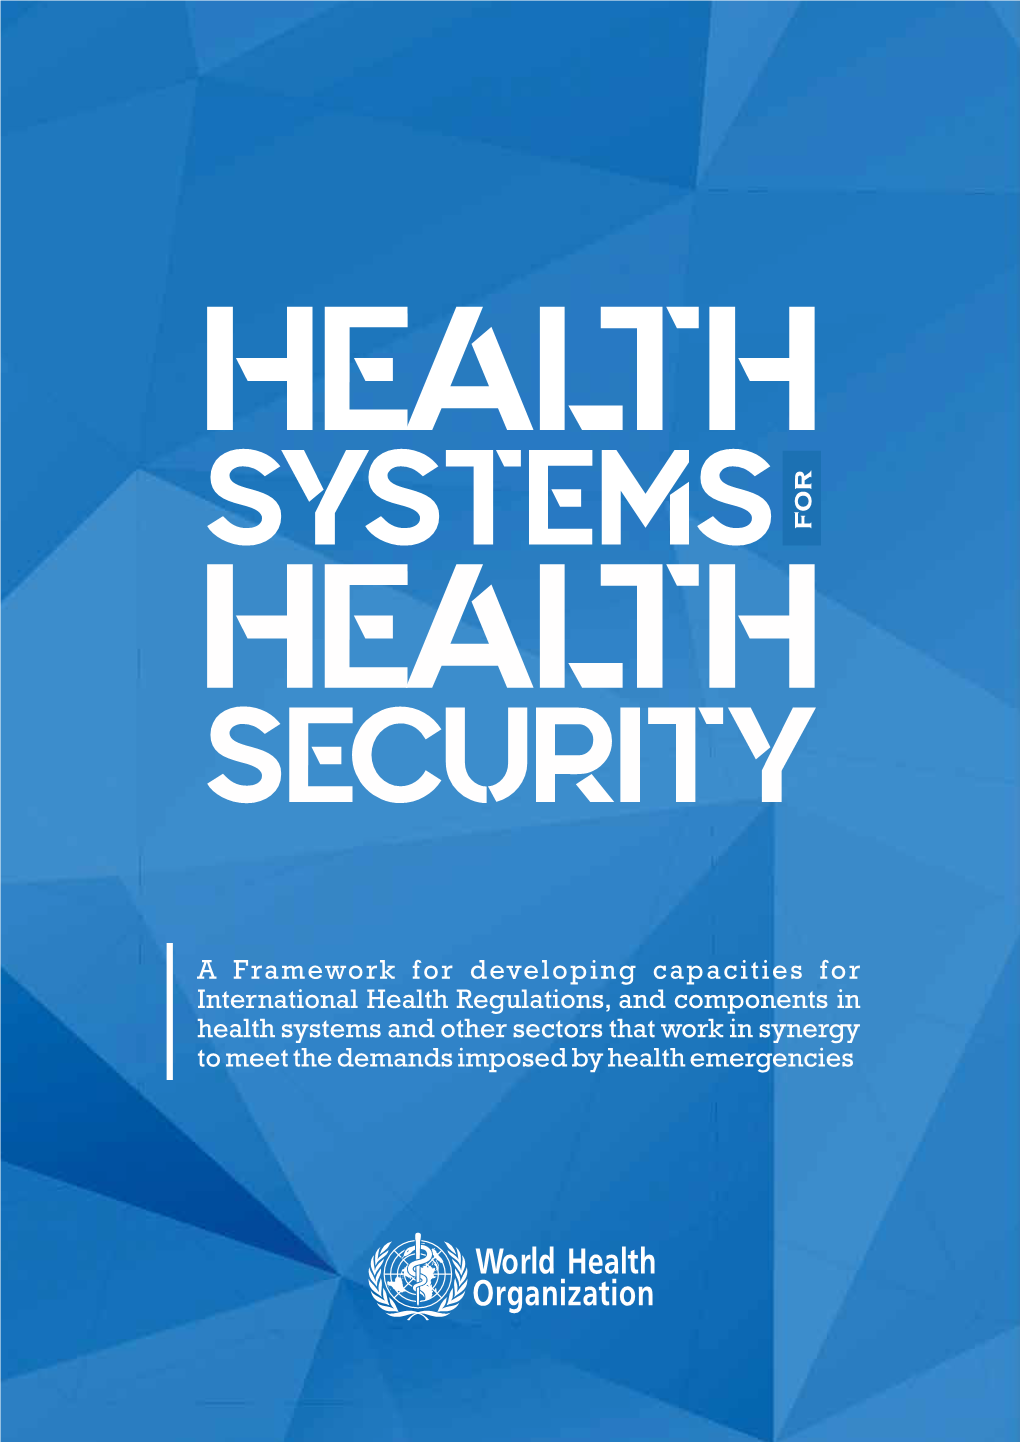 SYSTEMS R Fo HEALTH SECURITY